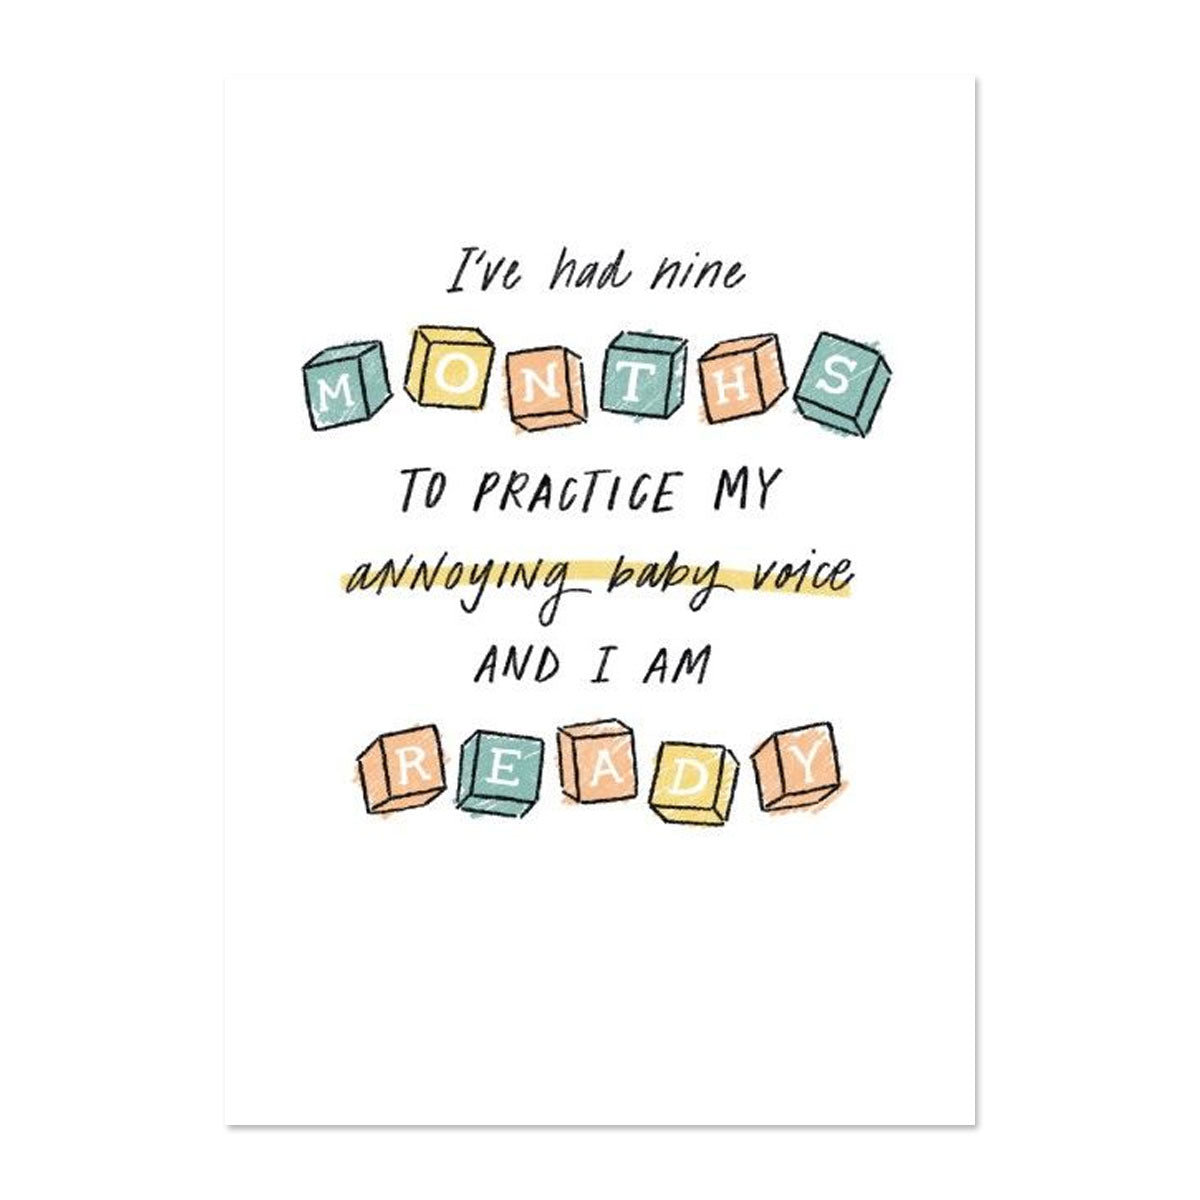 ANNOYING BABY VOICE BABY CARD BY PAPER REBEL